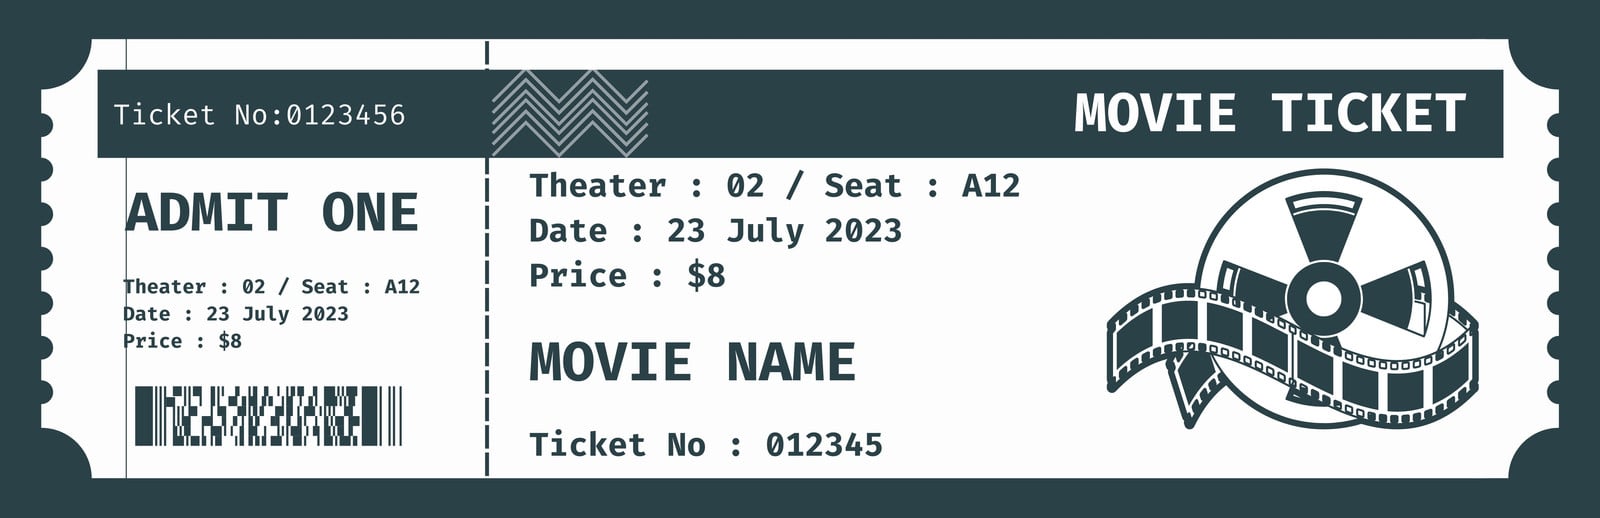 movie ticket template for publisher